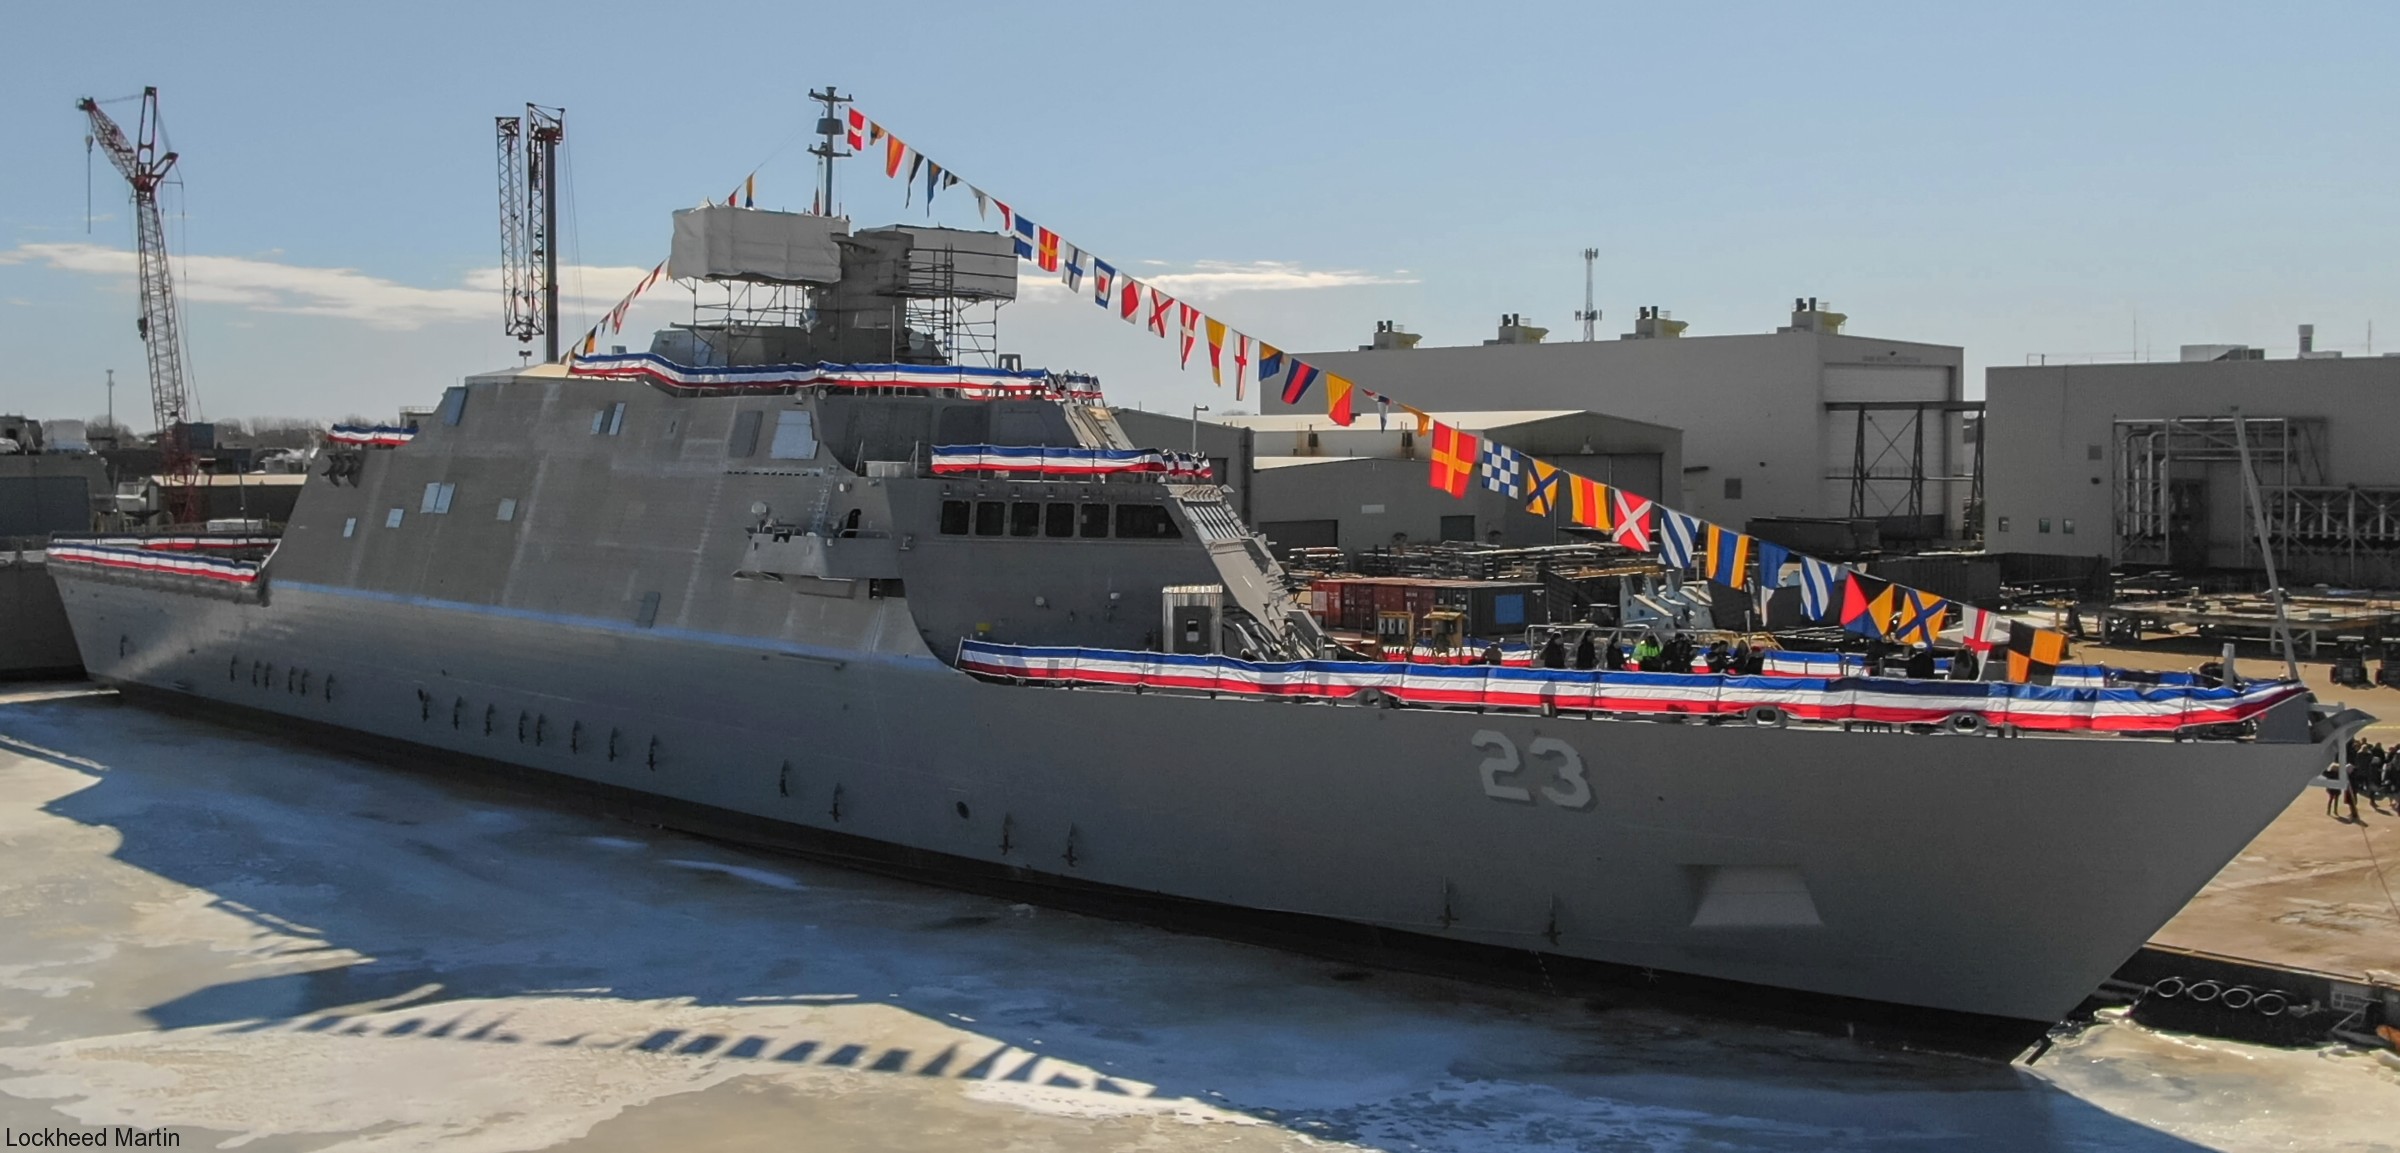 lcs-23 uss cooperstown freedom class littoral combat ship us navy 10 christening ceremony marinette marine